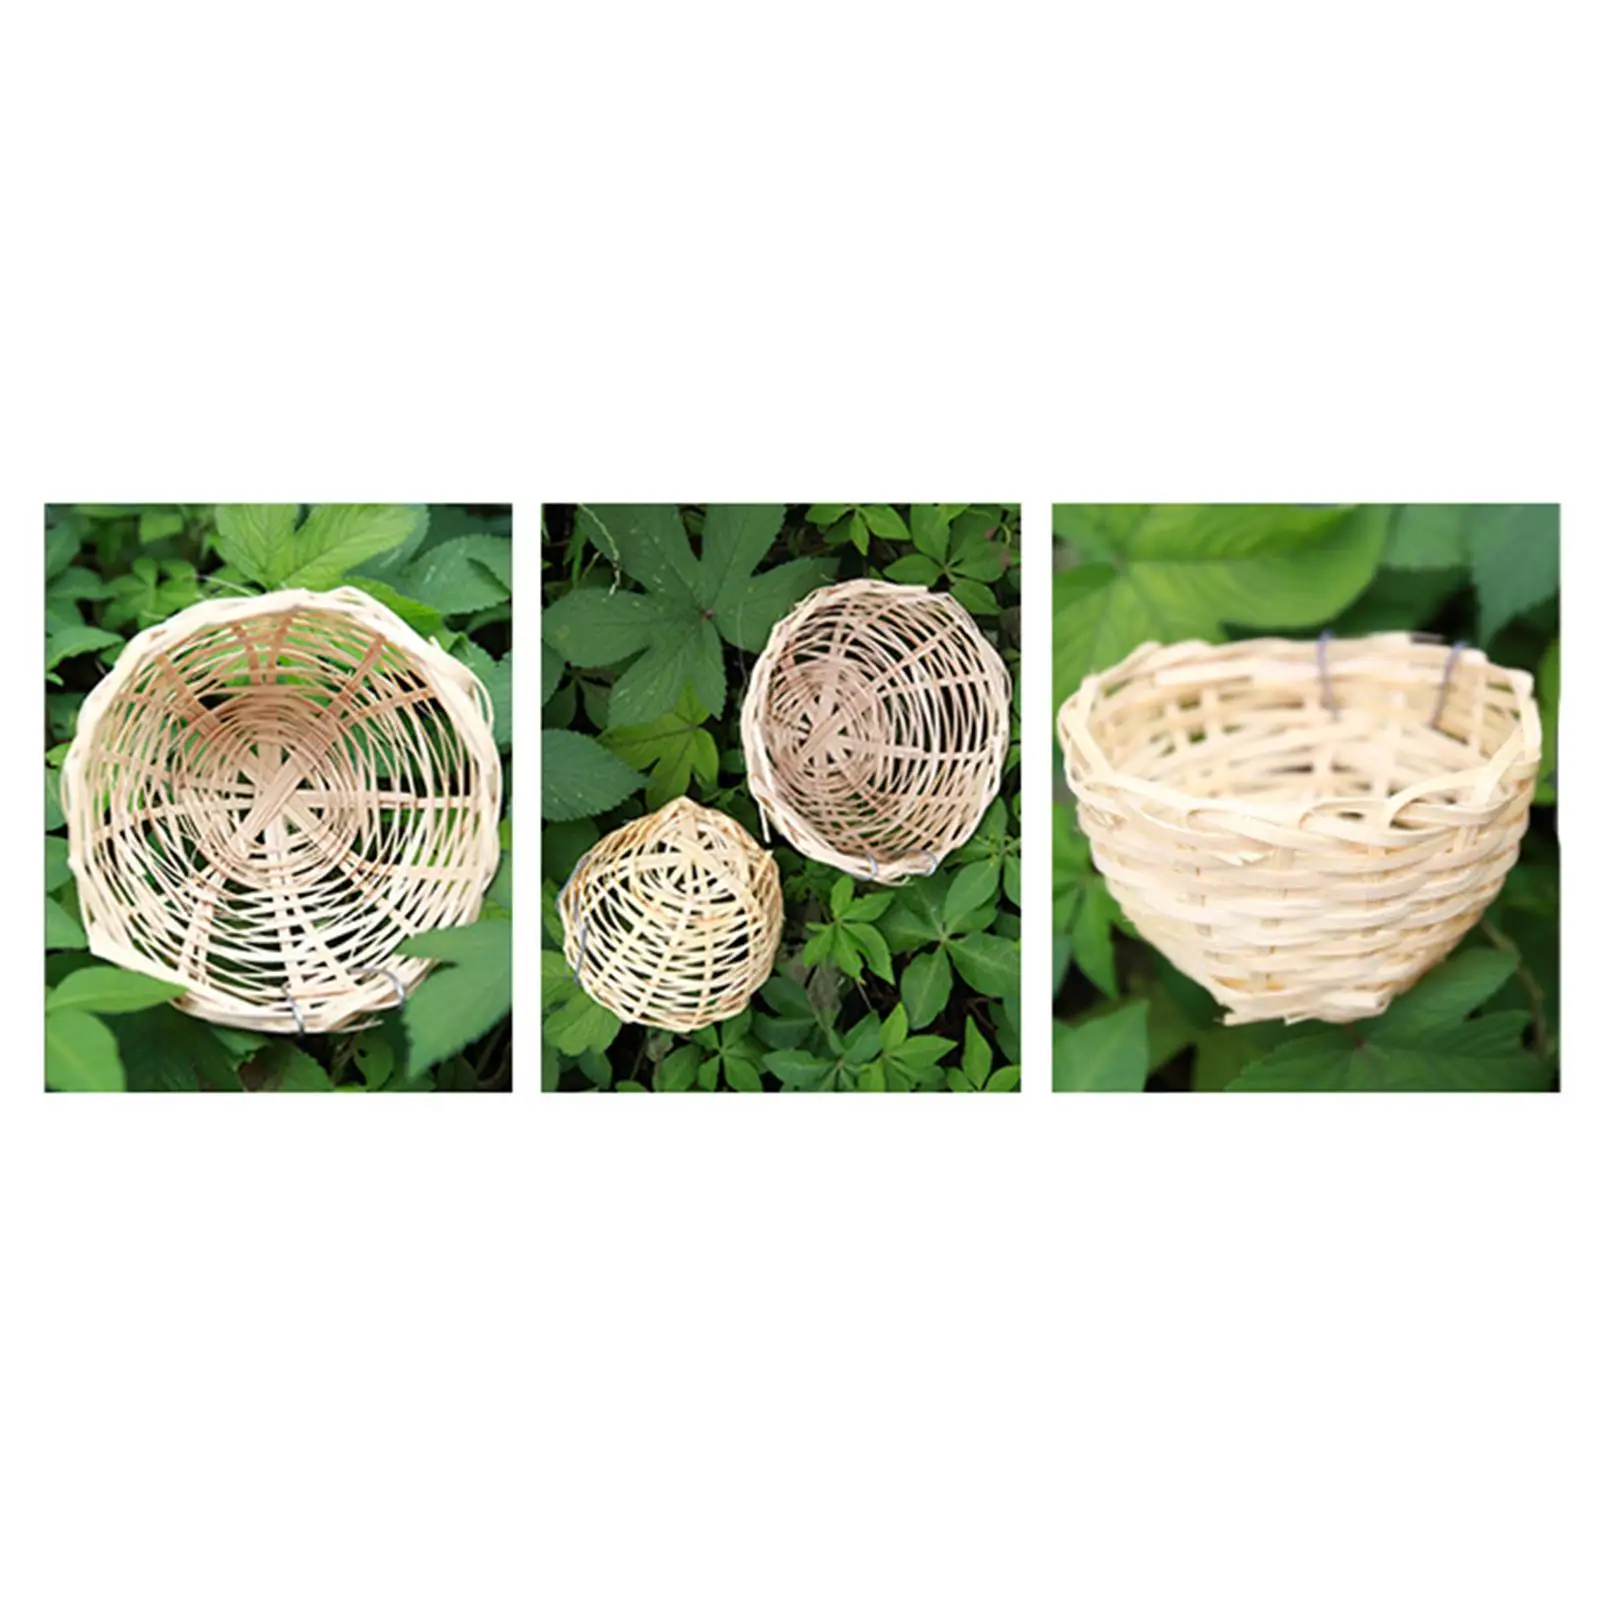 Birdhouse Pet Bedroom Hand Woven Hand Woven Birdhouses Humming Bird Houses for Decoration Lawn Roosting Outdoor Yard Lovebirds